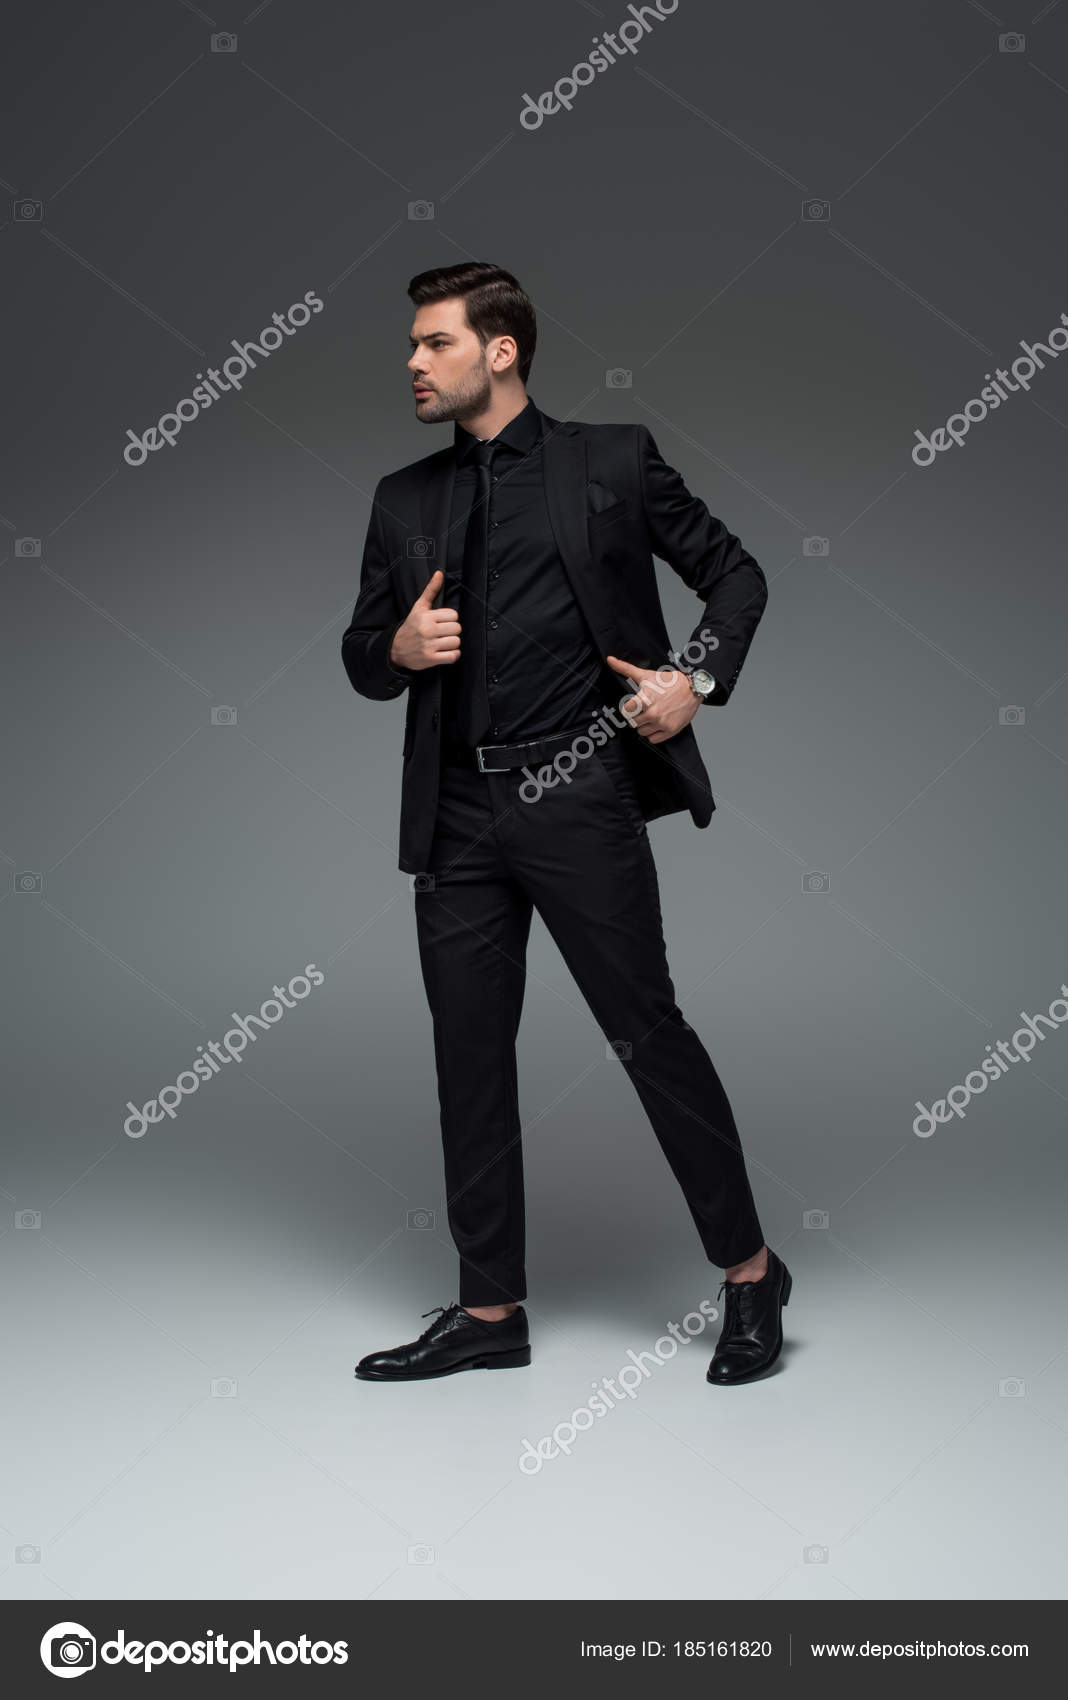 15jun20-TOP5(20/20) | Mens photoshoot poses, Photography poses for men,  Male models poses